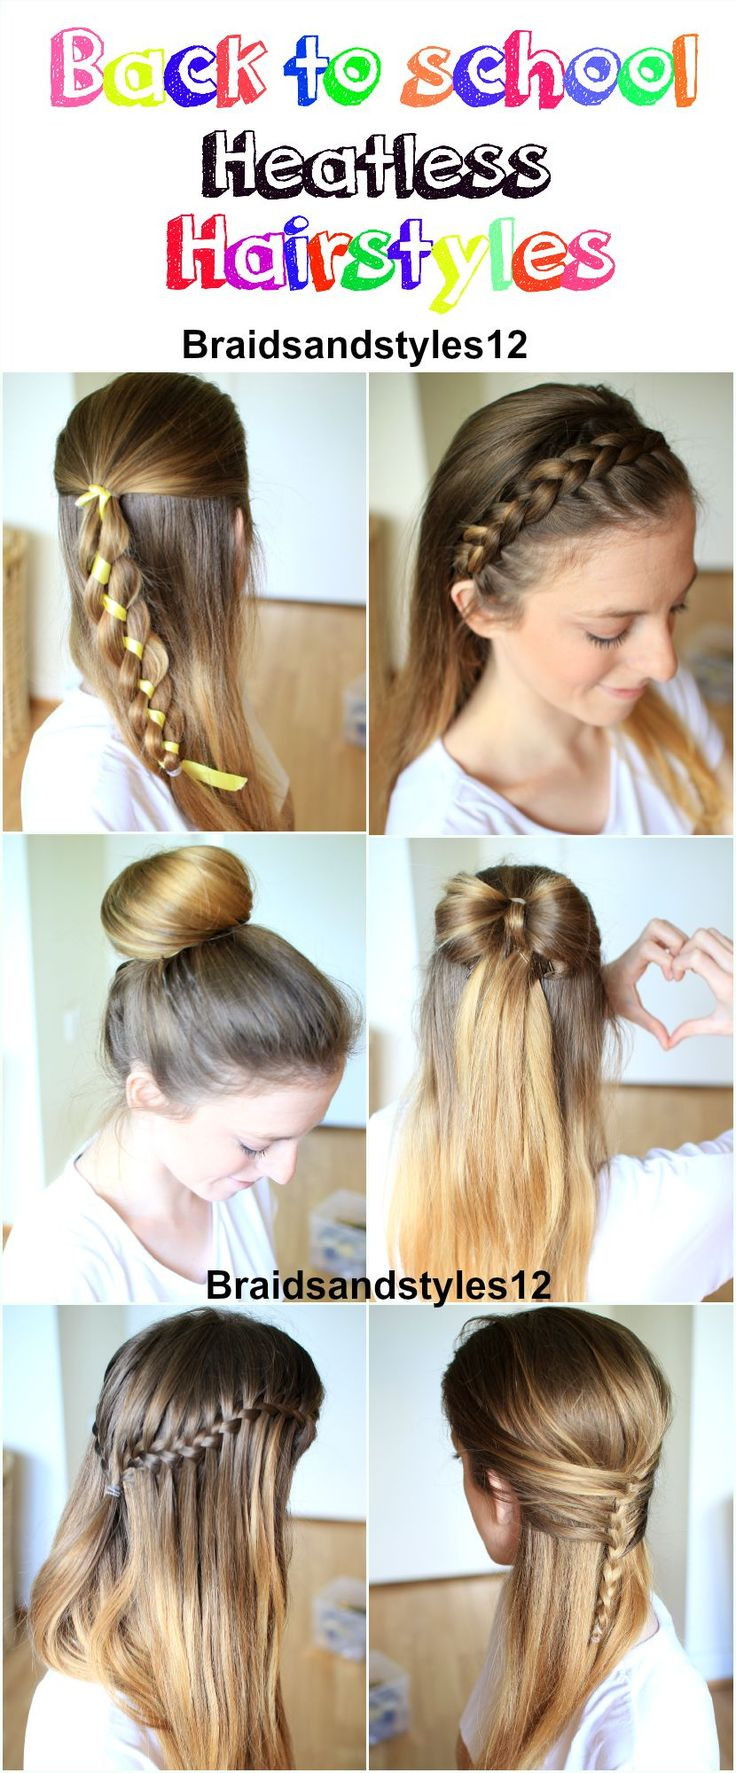 Back To School Hairstyles
 1000 ideas about School Hairstyles on Pinterest